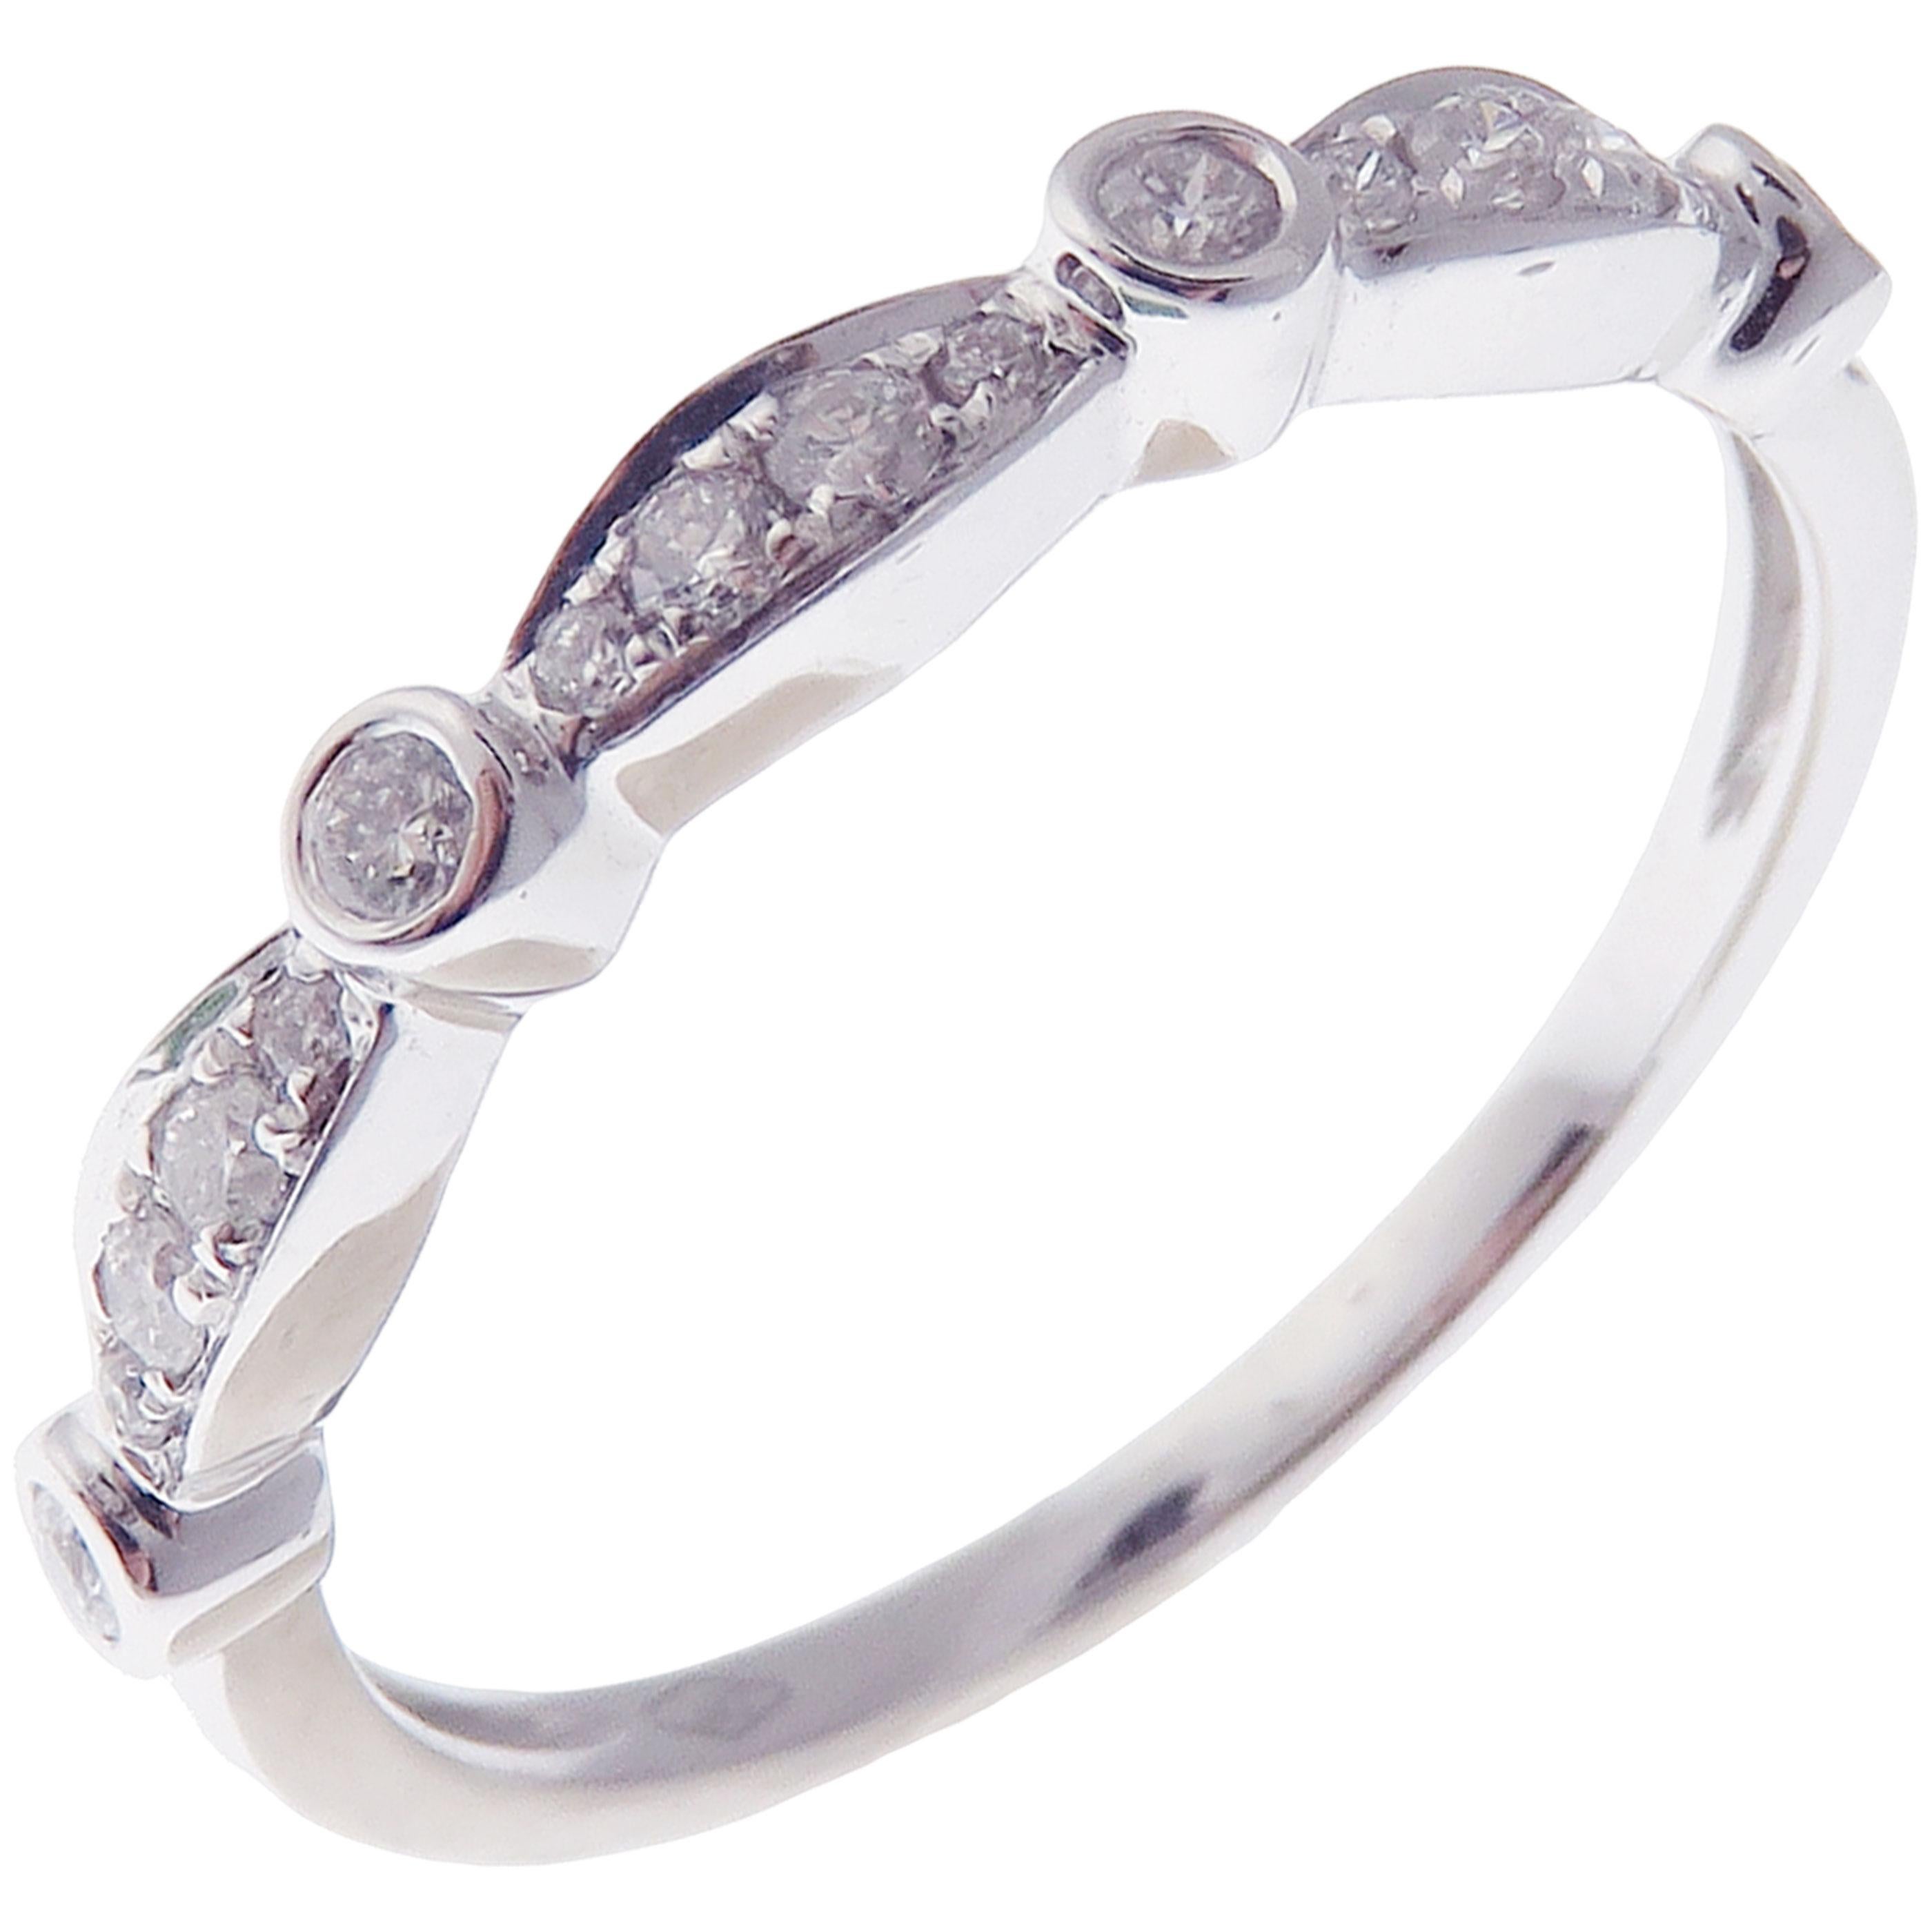 This simple stackable ring is crafted in 18-karat white gold, featuring 17 round white diamonds totaling of 0.18 carats.
Approximate total weight 1.94 grams.
Standard Ring size 7
SI-G Quality natural white diamonds.